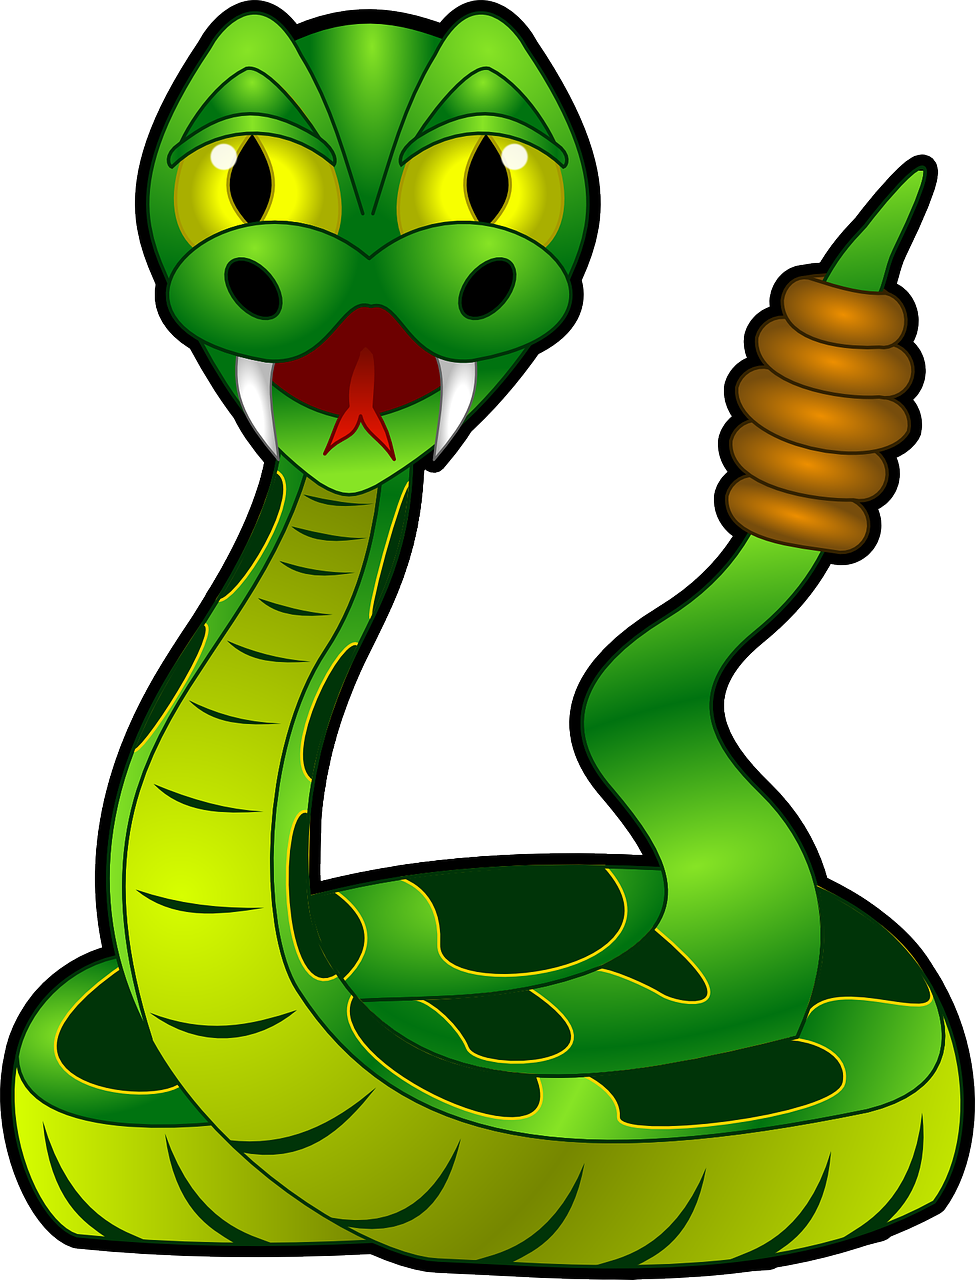 a cartoon green snake giving a thumbs up, an illustration of, cobra, snakes for hair, snake assassin, low res, pillar